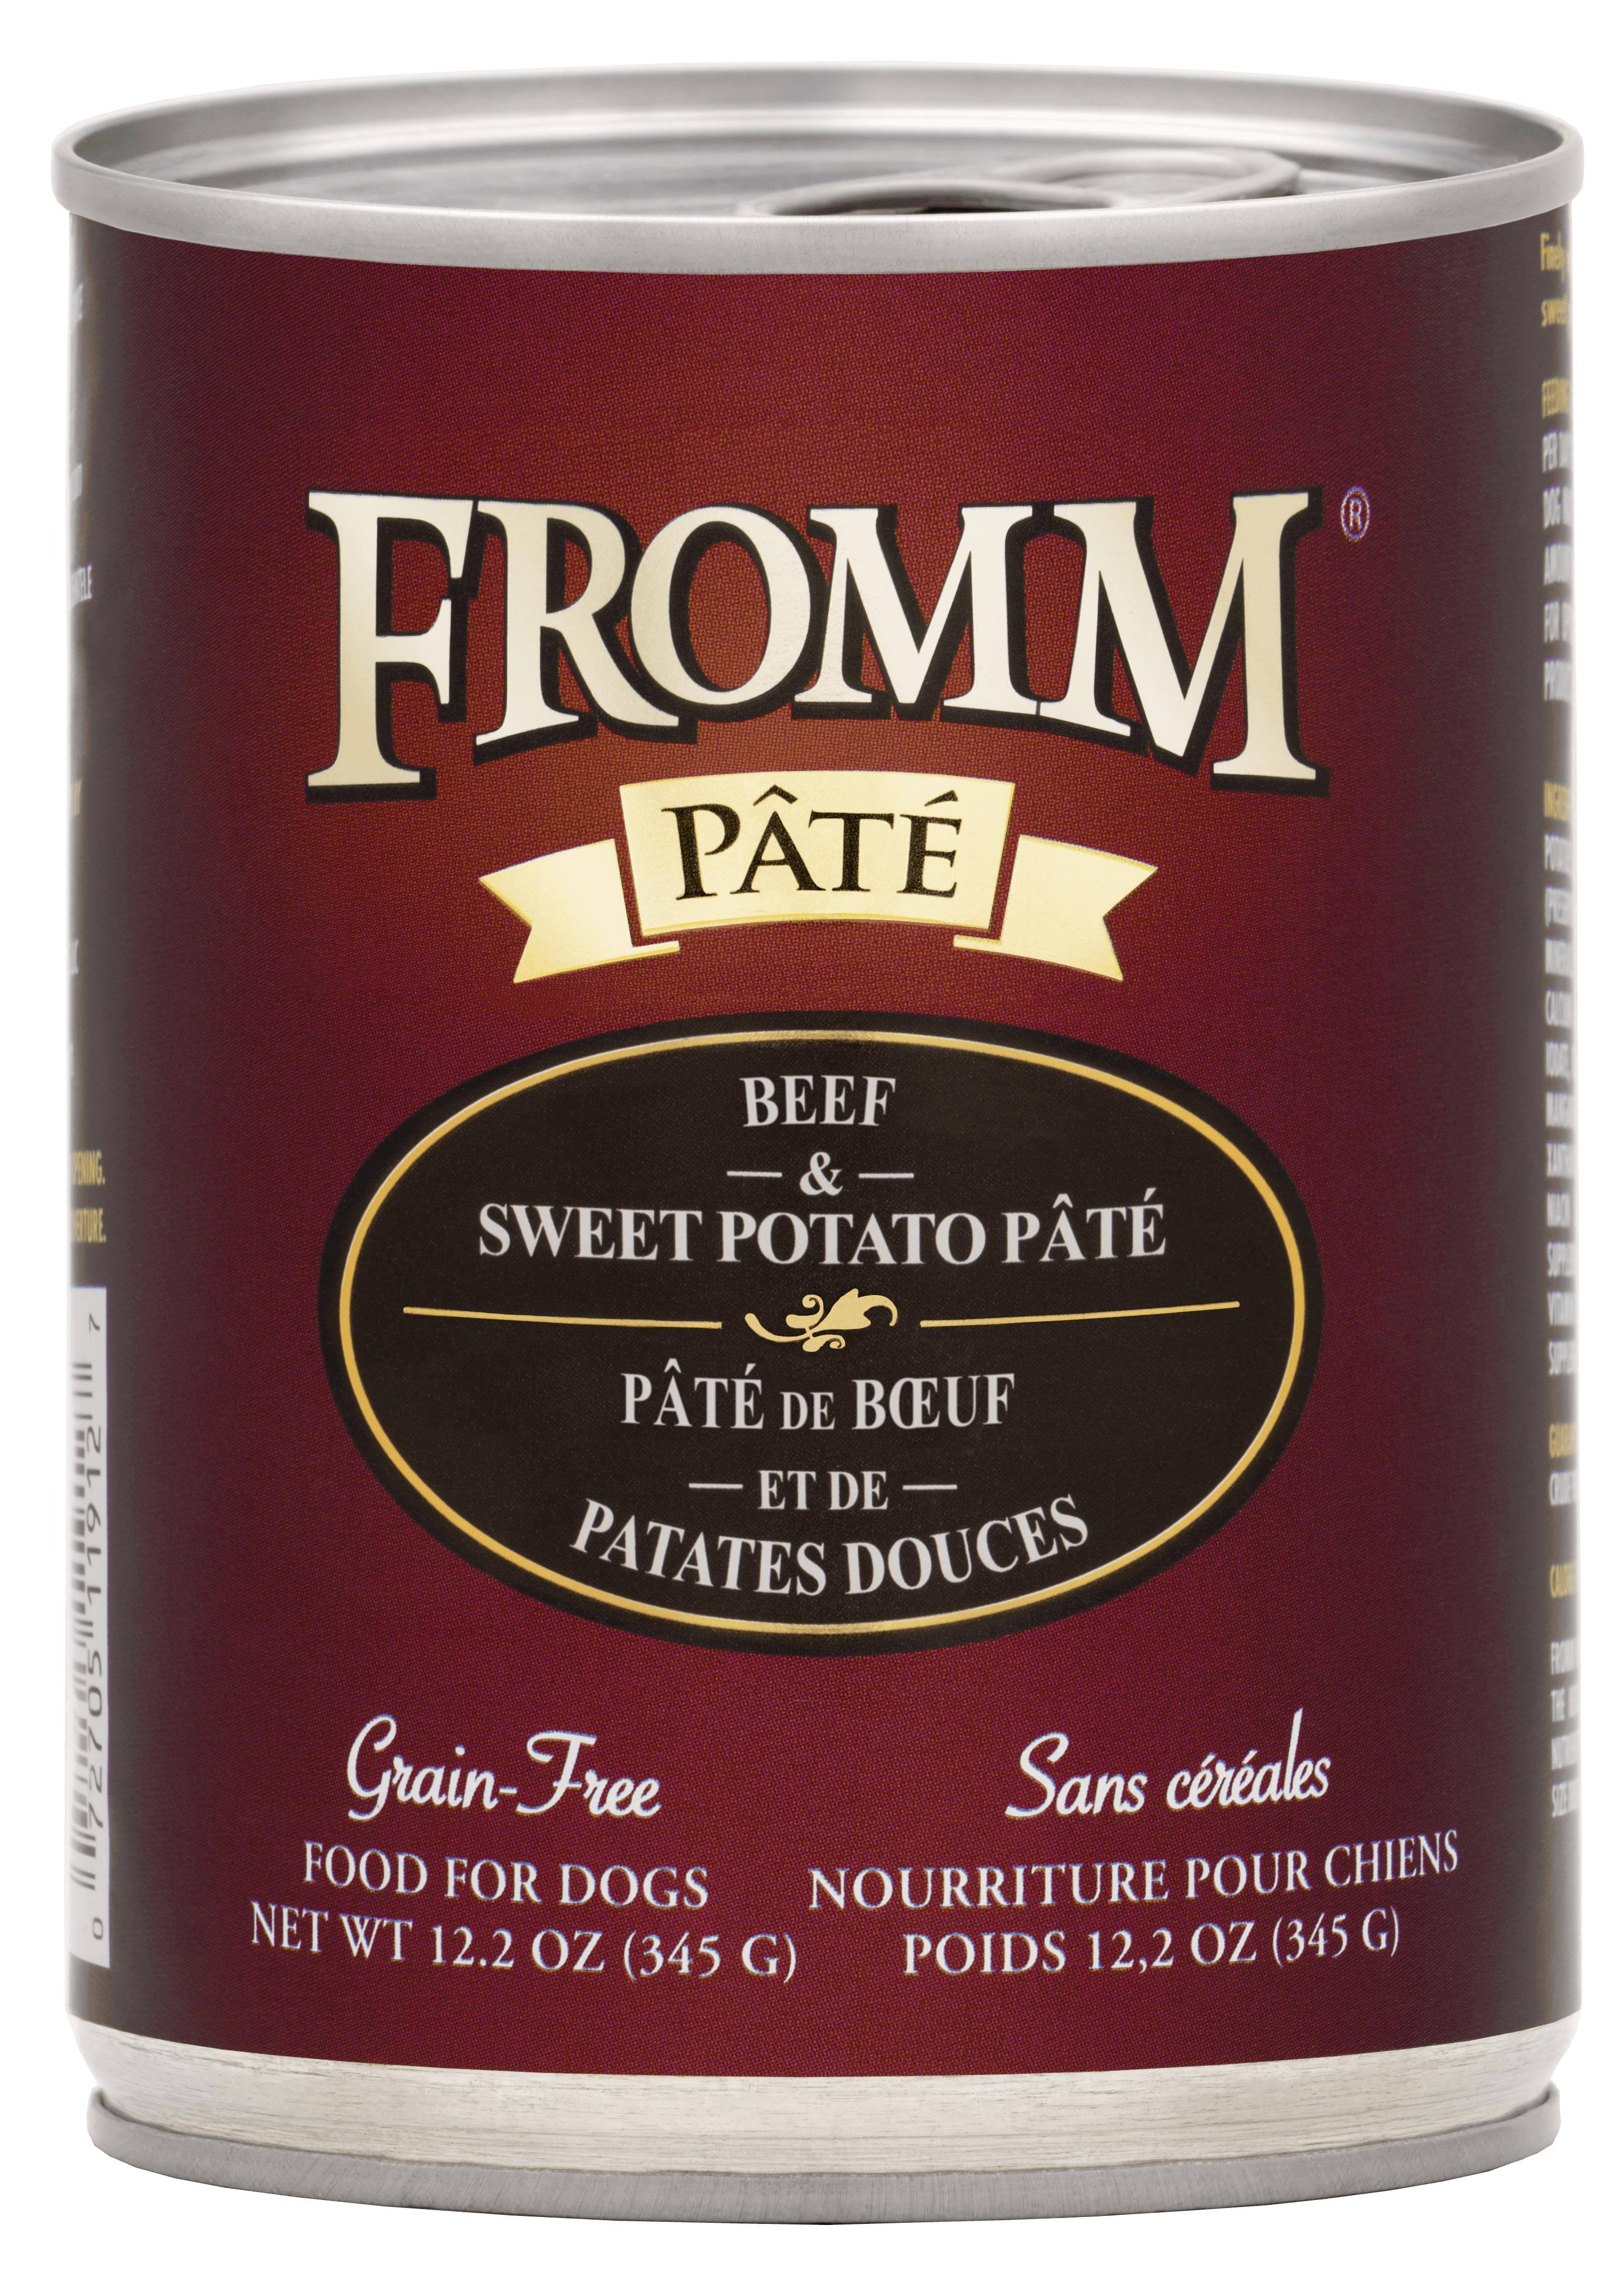 Fromm Grain Free Beef & Sweet Potato Pate Canned Dog Food - 12.2-oz, Case of 12